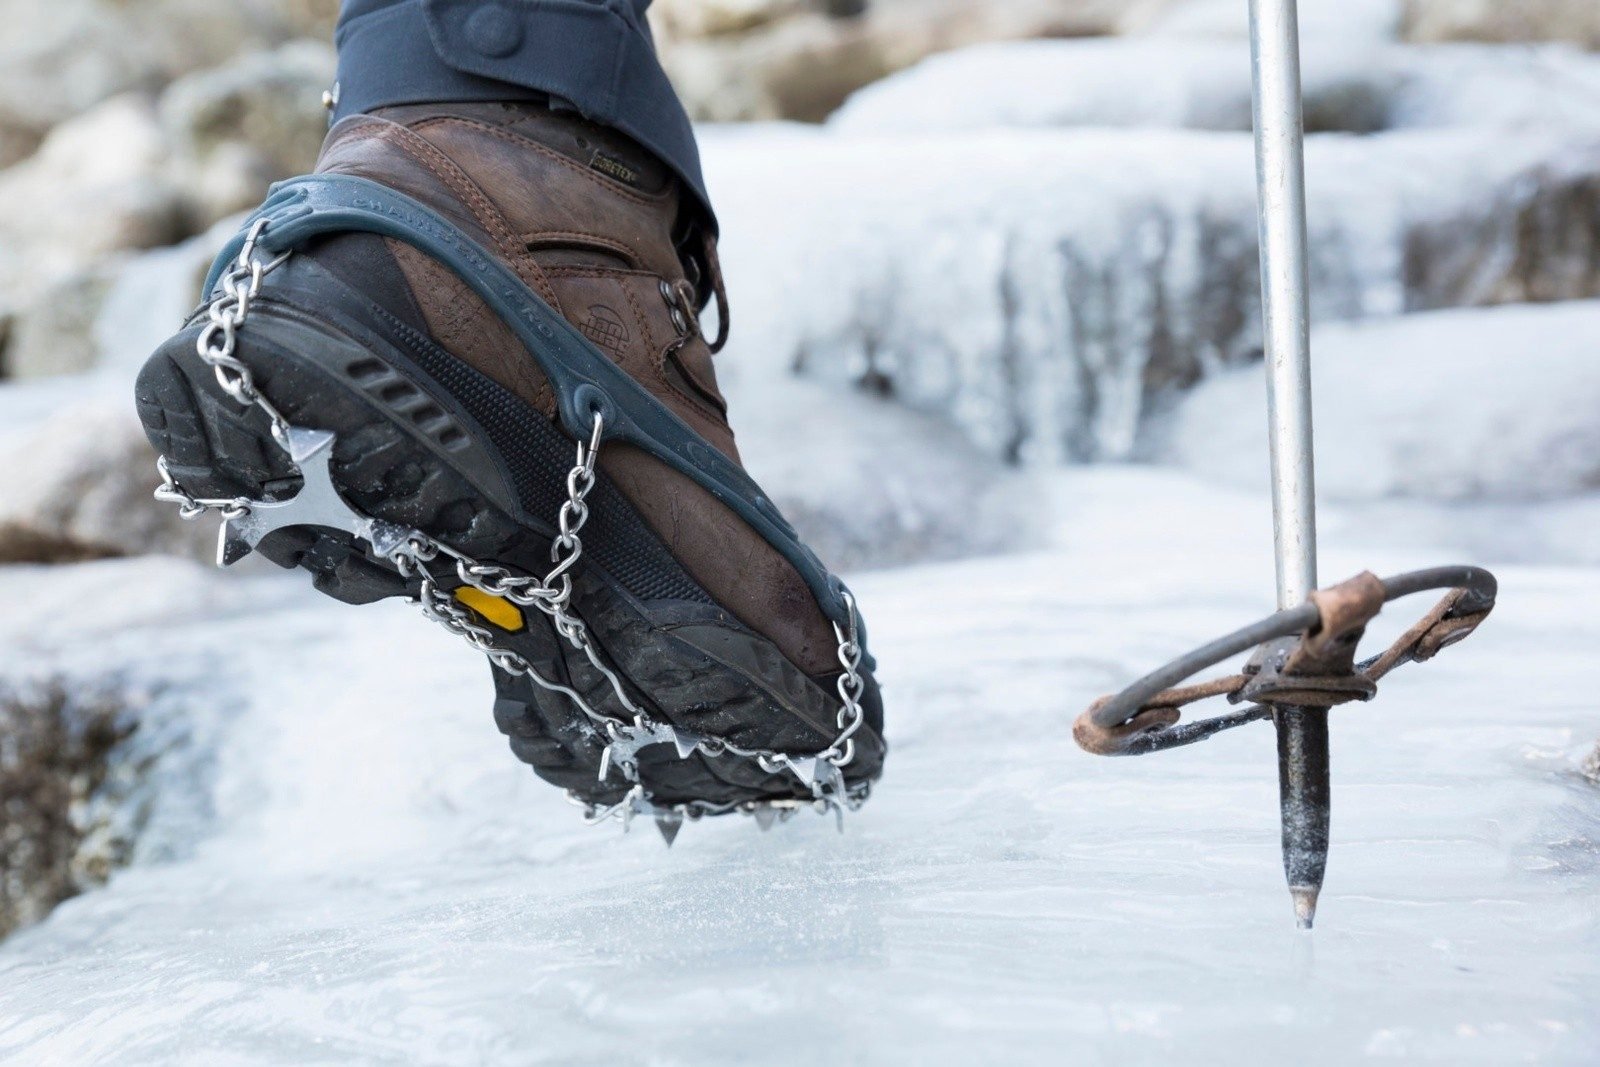 A close up of a hiking boot with crampons on it, and the tip of a hiking pole.